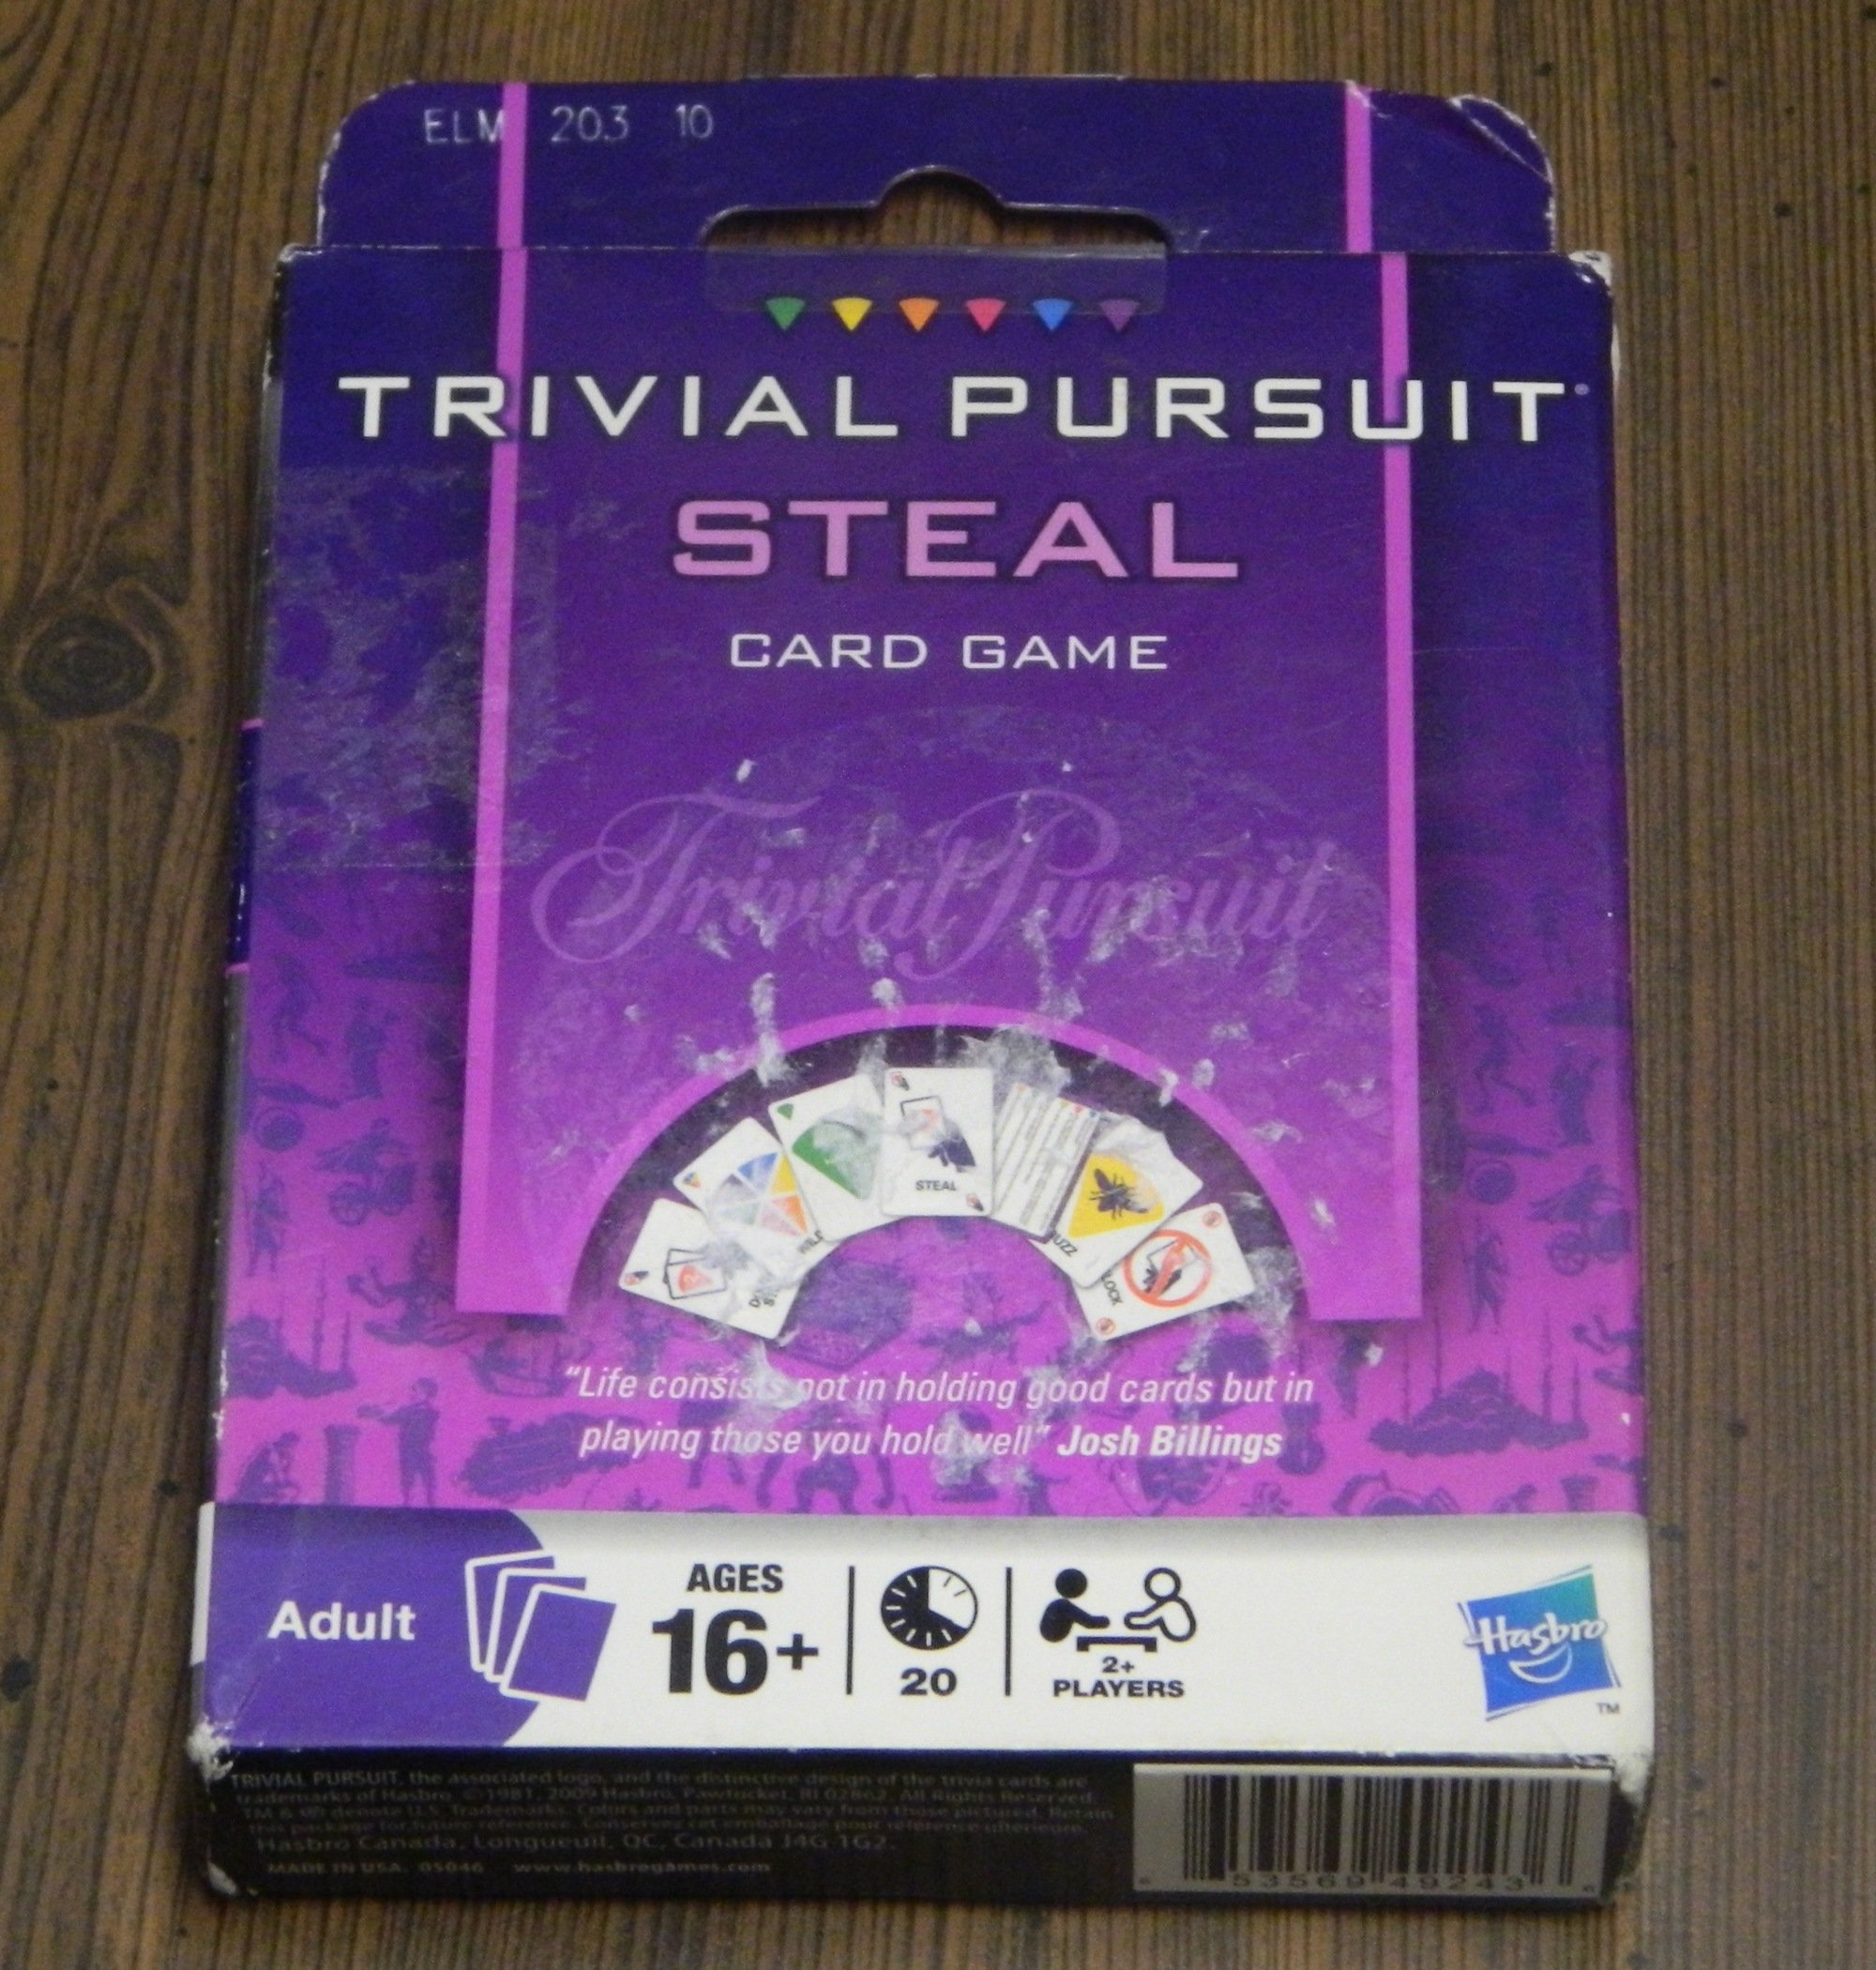 Trivial Pursuit Steal Card Game Review